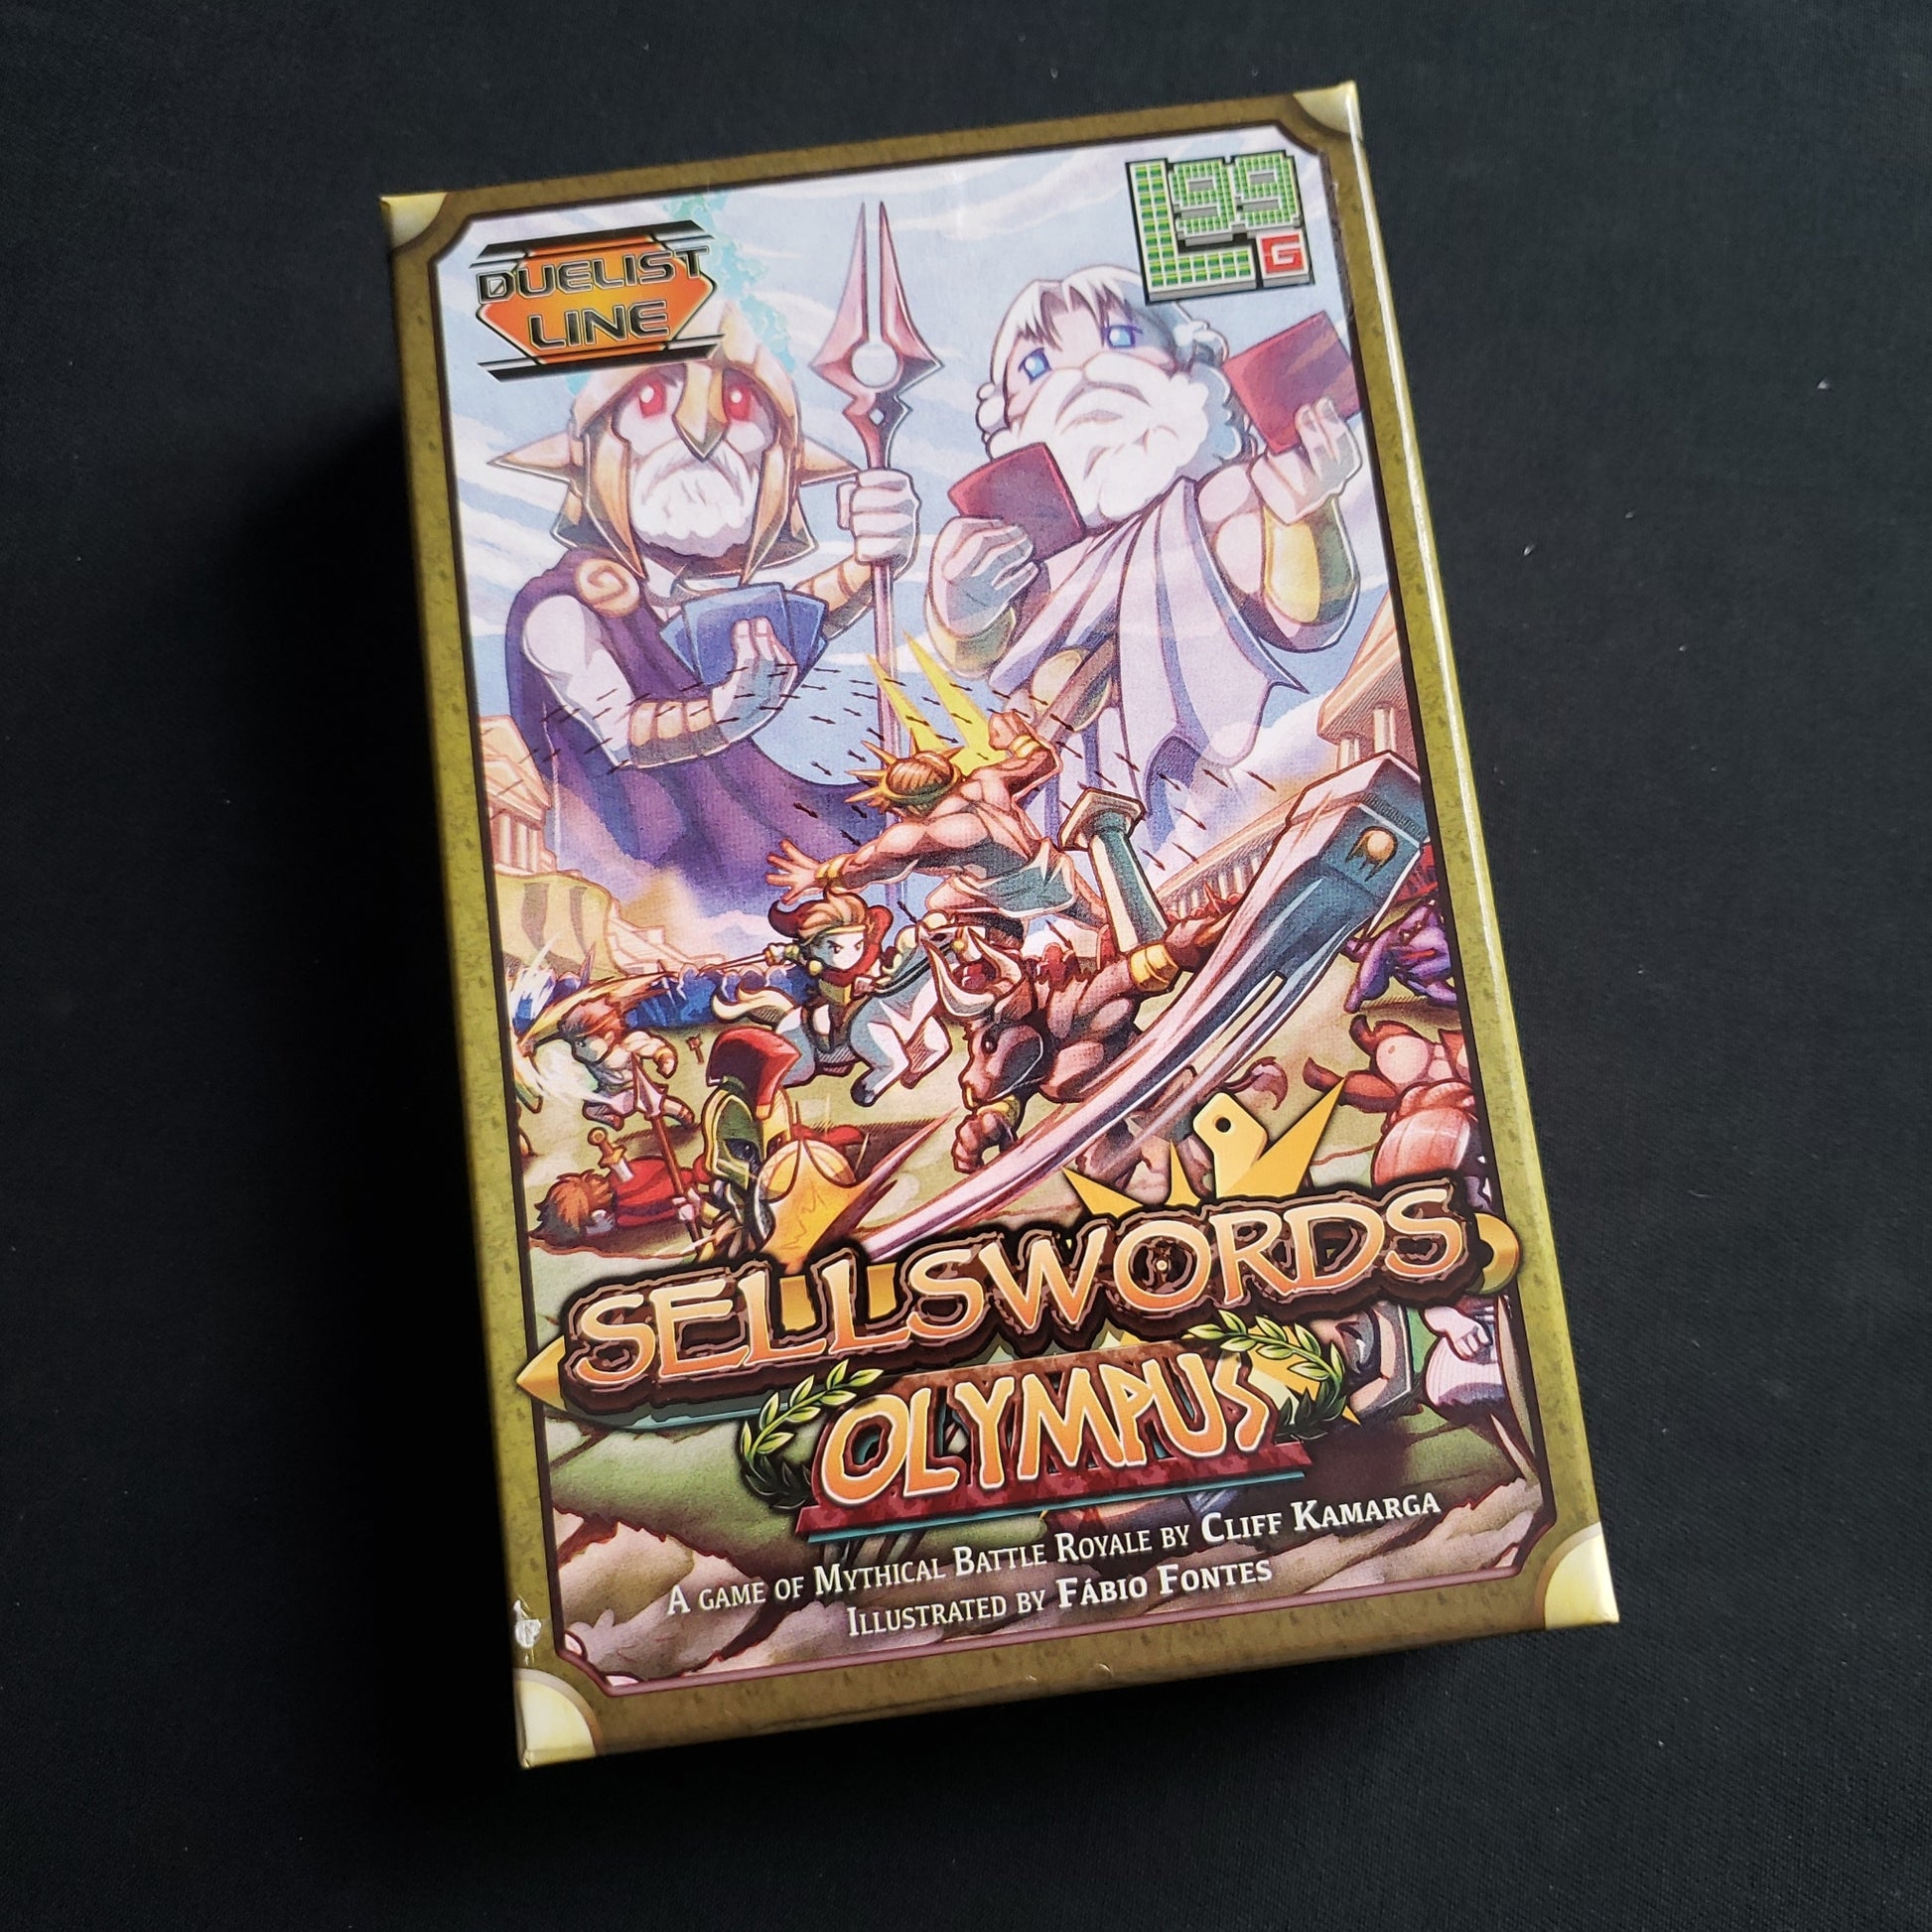 Image shows the front cover of the box of the Sellswords: Olympus board game